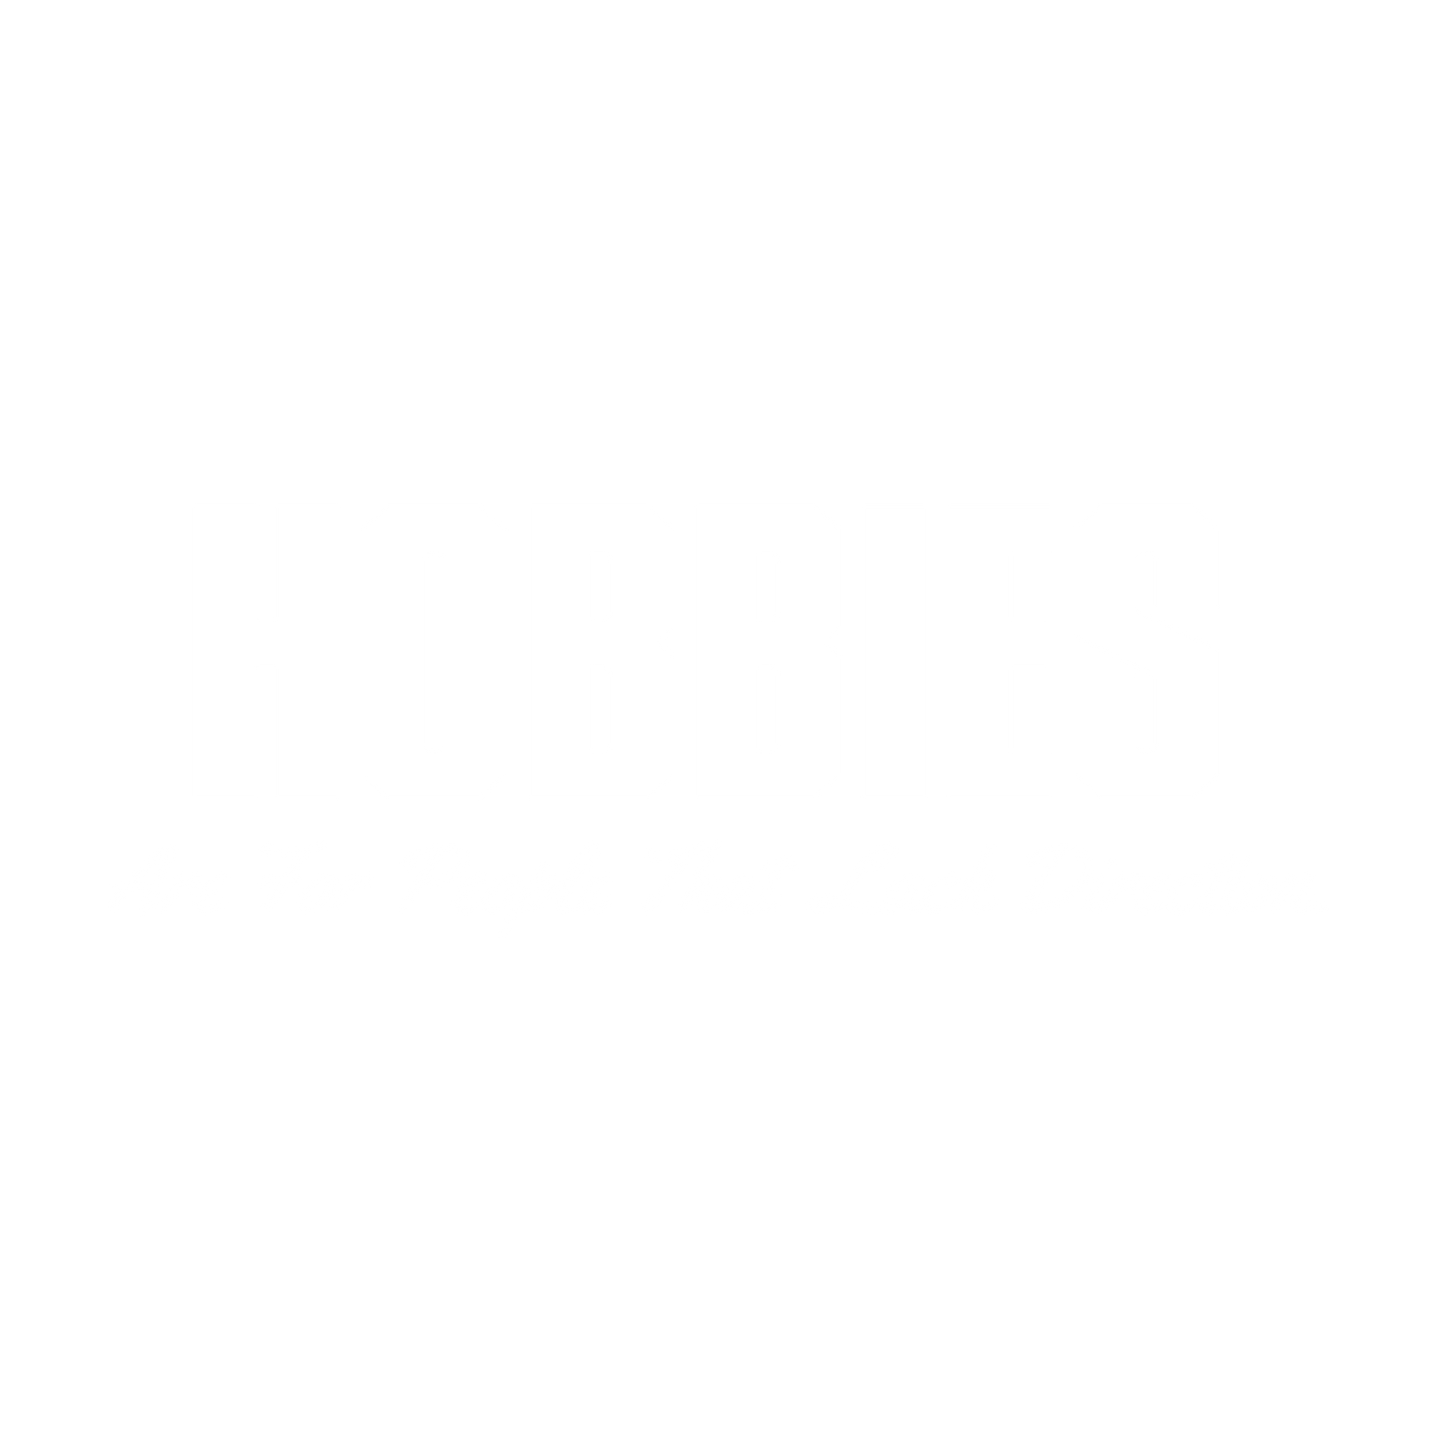 Hobbies Are For People That Lack Direction.